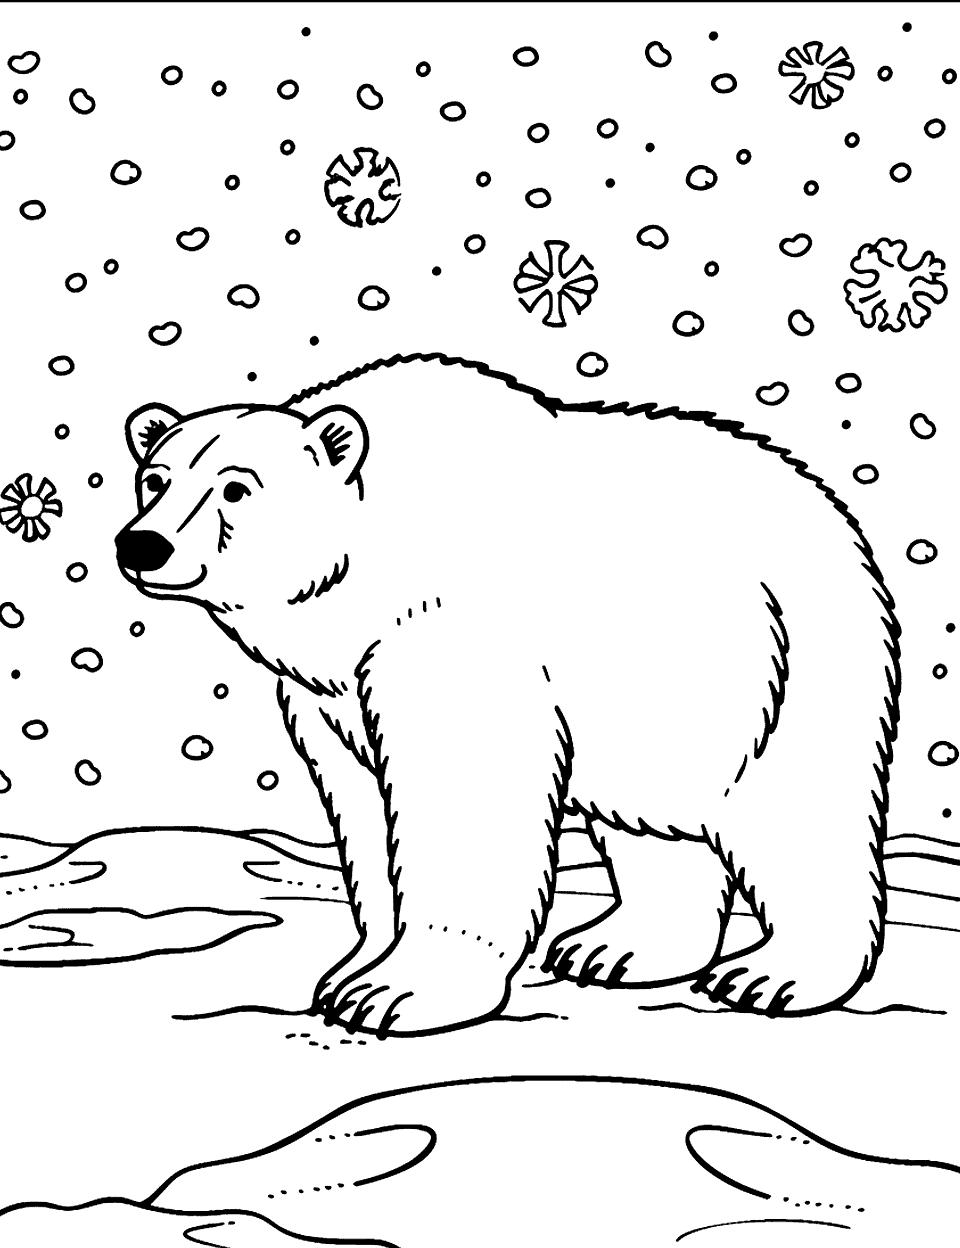 Polar Bear with Snowflakes Coloring Page - A polar bear standing as large snowflakes fall gently around it.